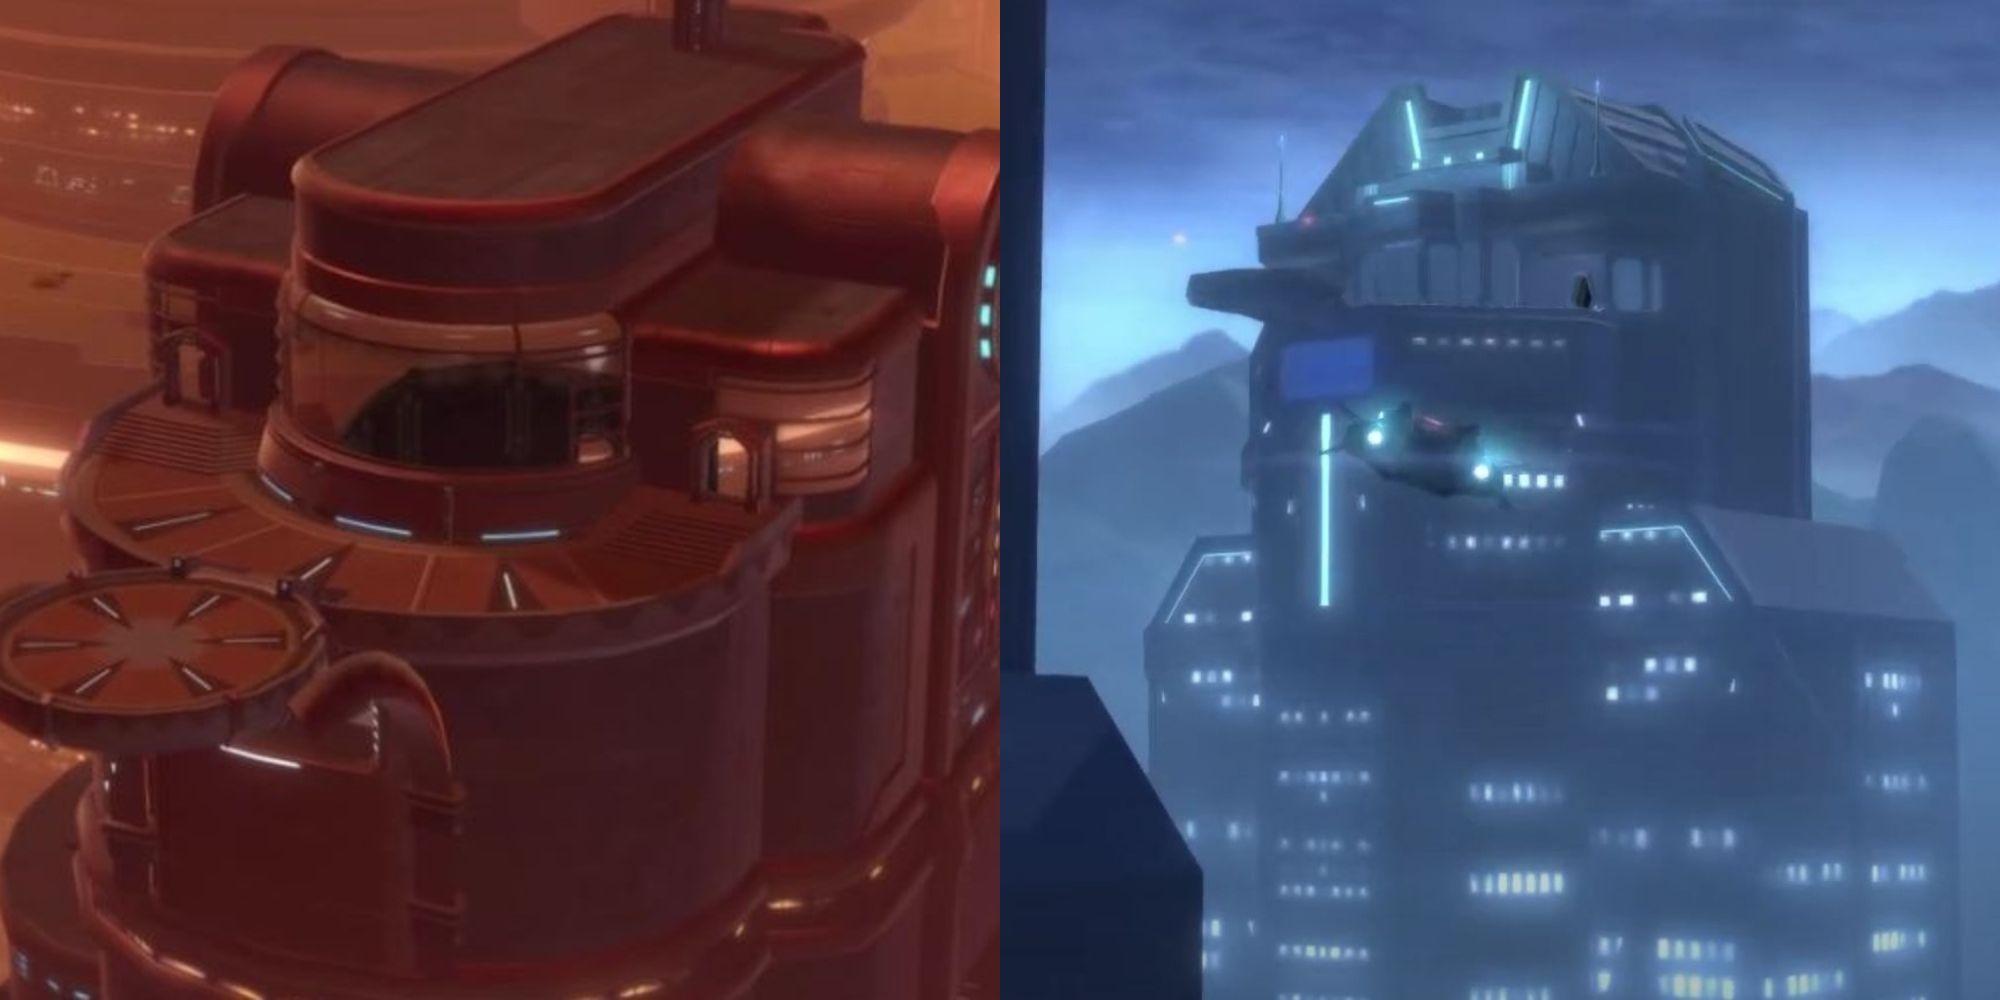 SWTOR's Coruscant and Kaas City Apartments, seen from their exteriors